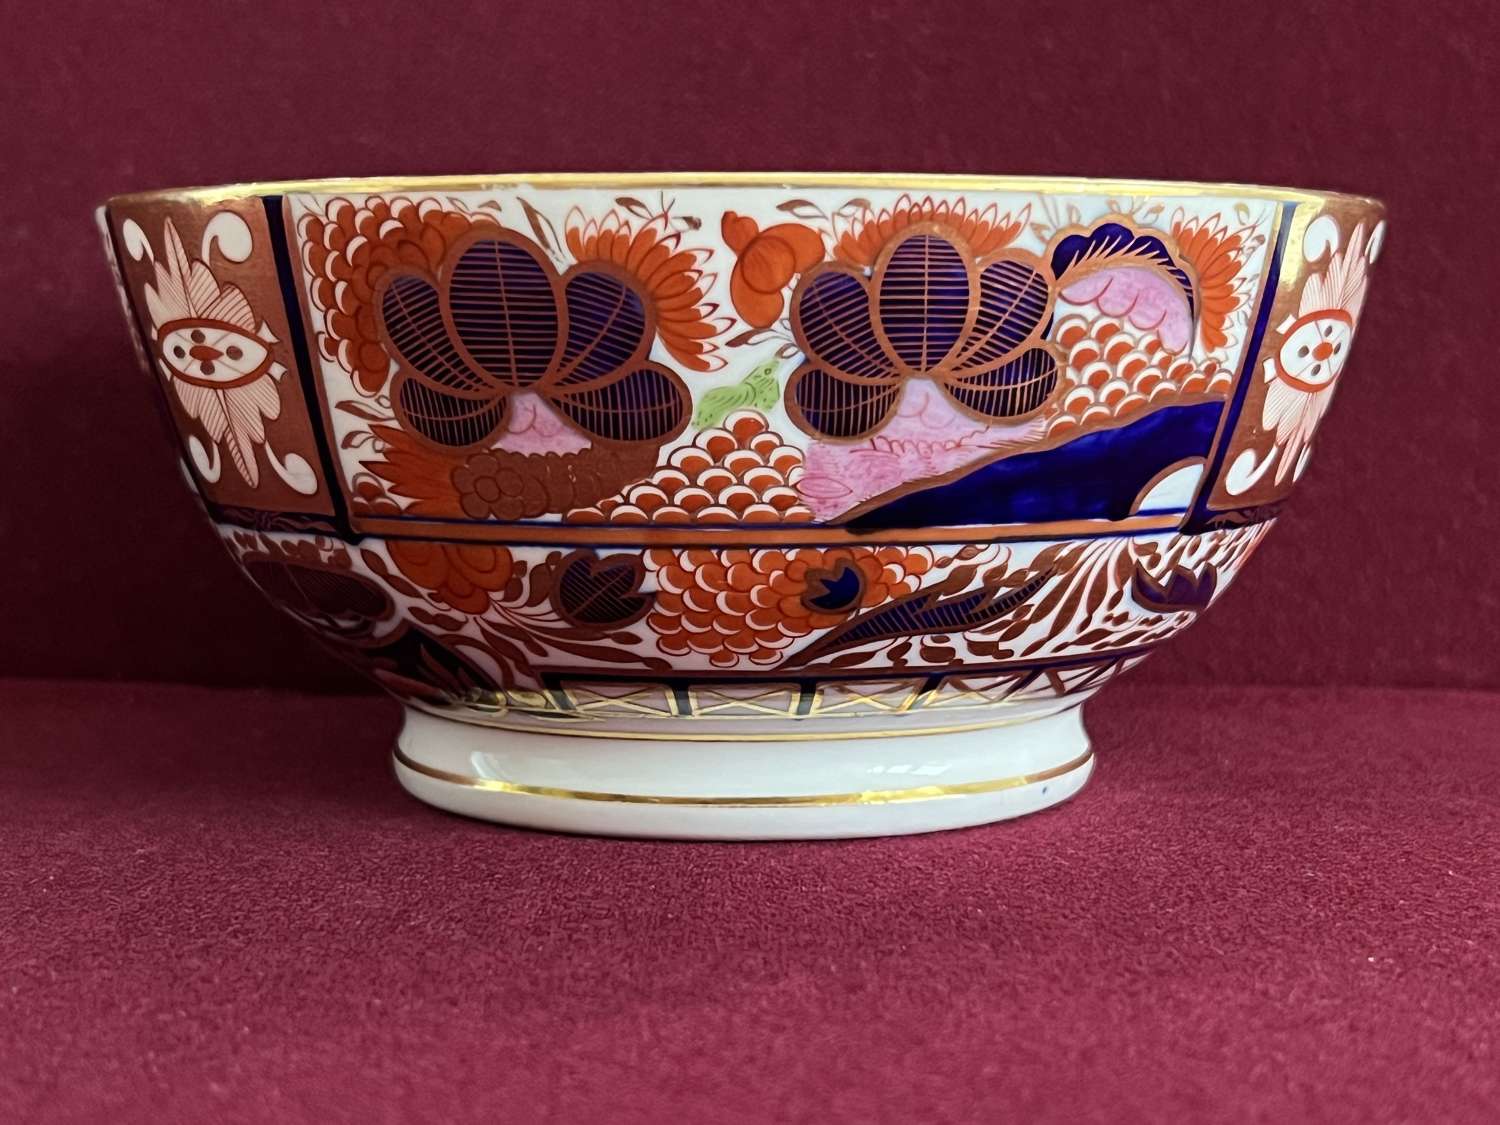 A Chamberlain Worcester Porcelain Bowl c.1802-1810 in pattern 240